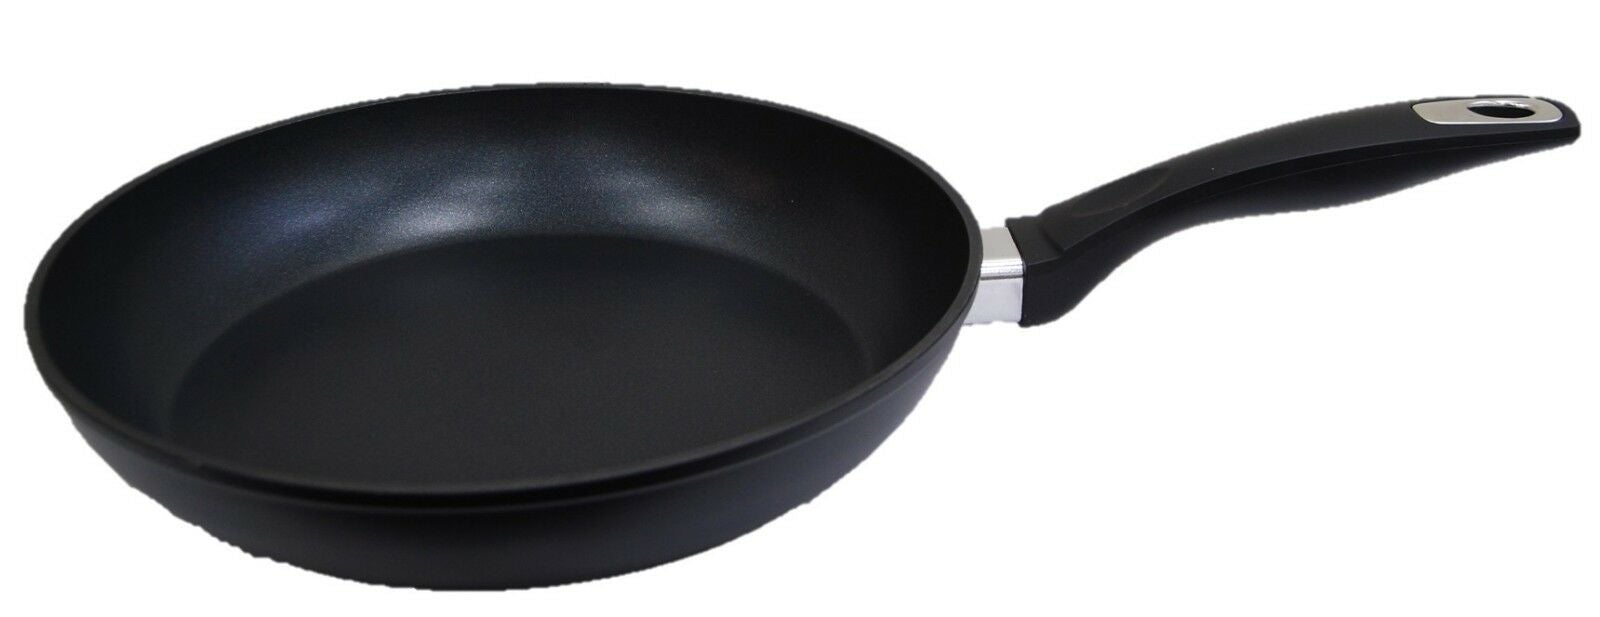 28cm Frying pan Non Stick, Induction Friendly Forged Aluminium